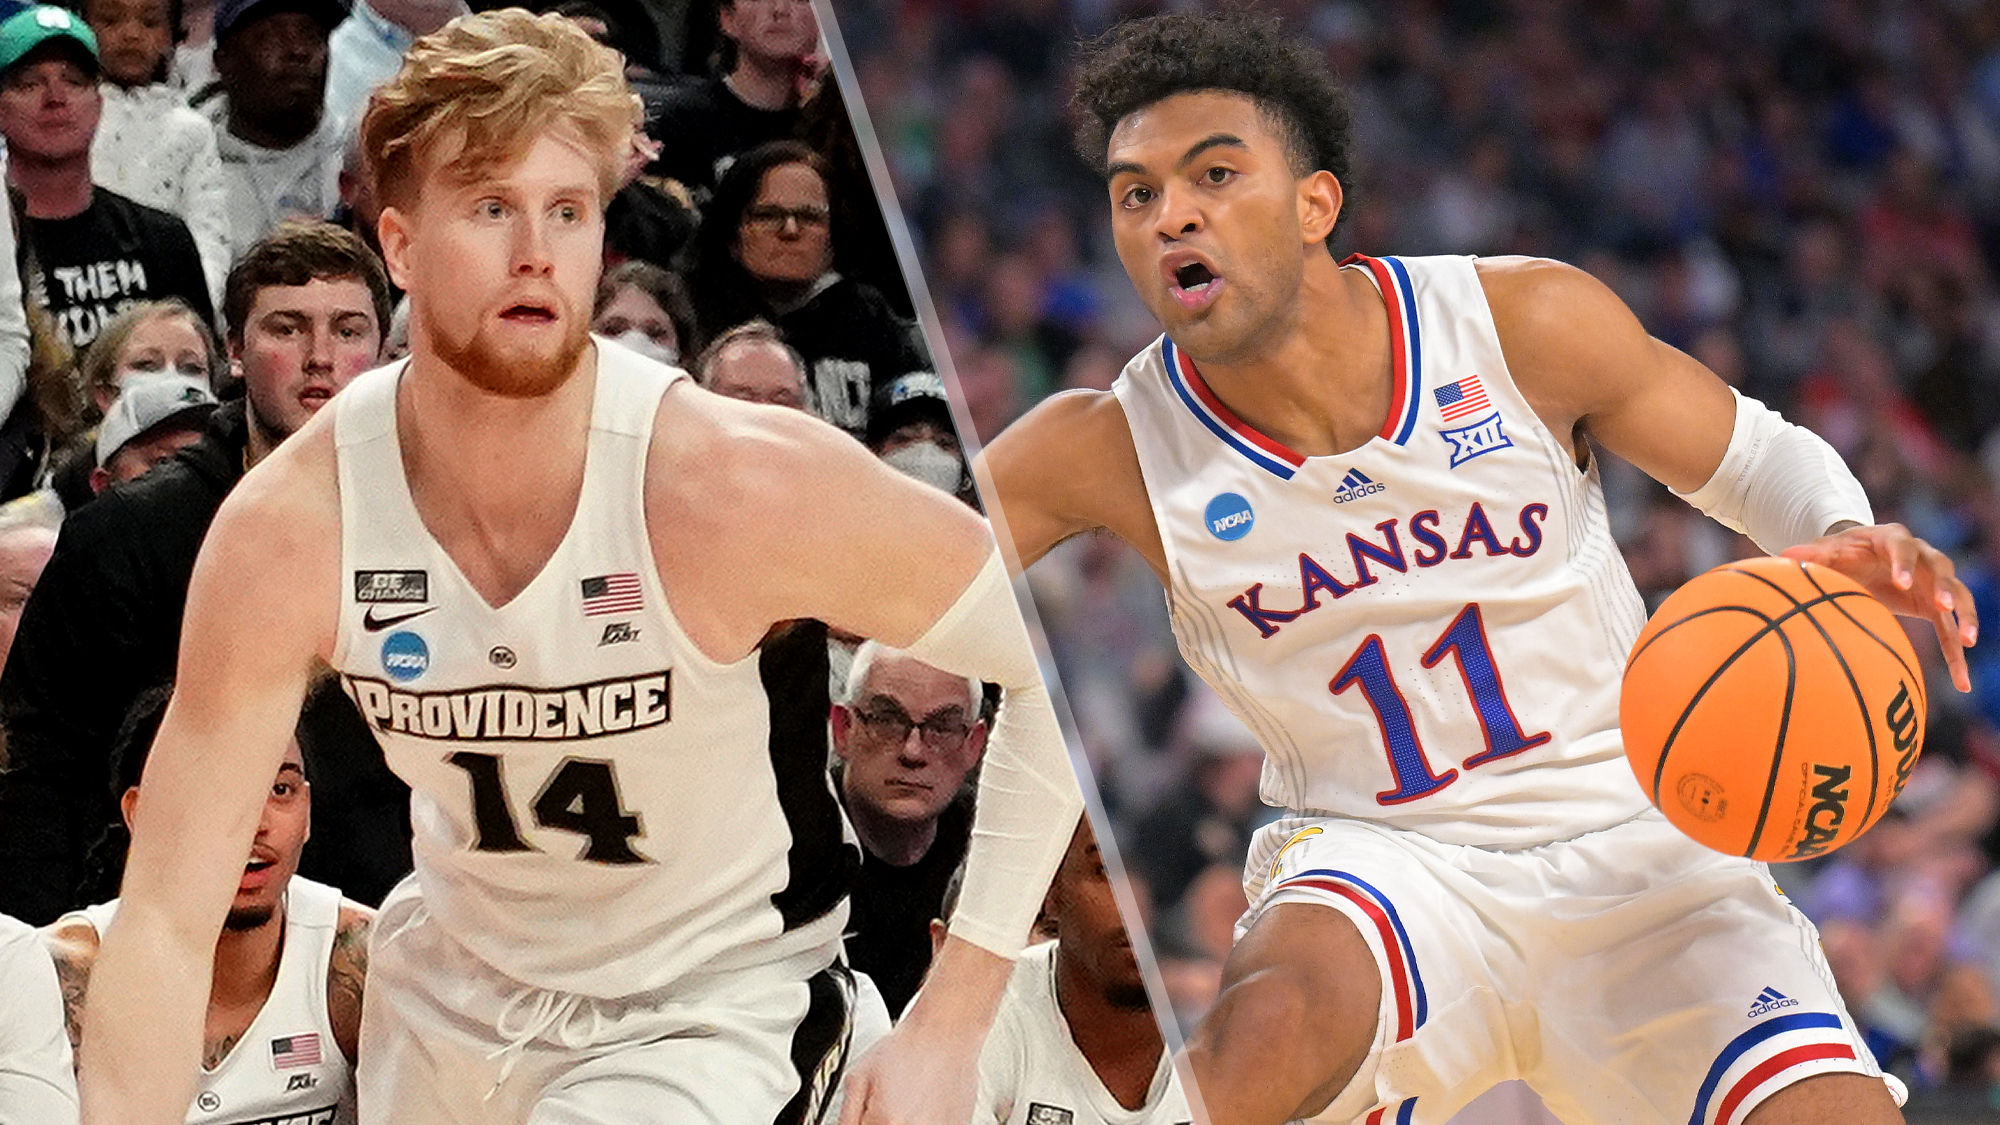 Providence vs Kansas live stream How to watch March Madness 2022 online Toms Guide